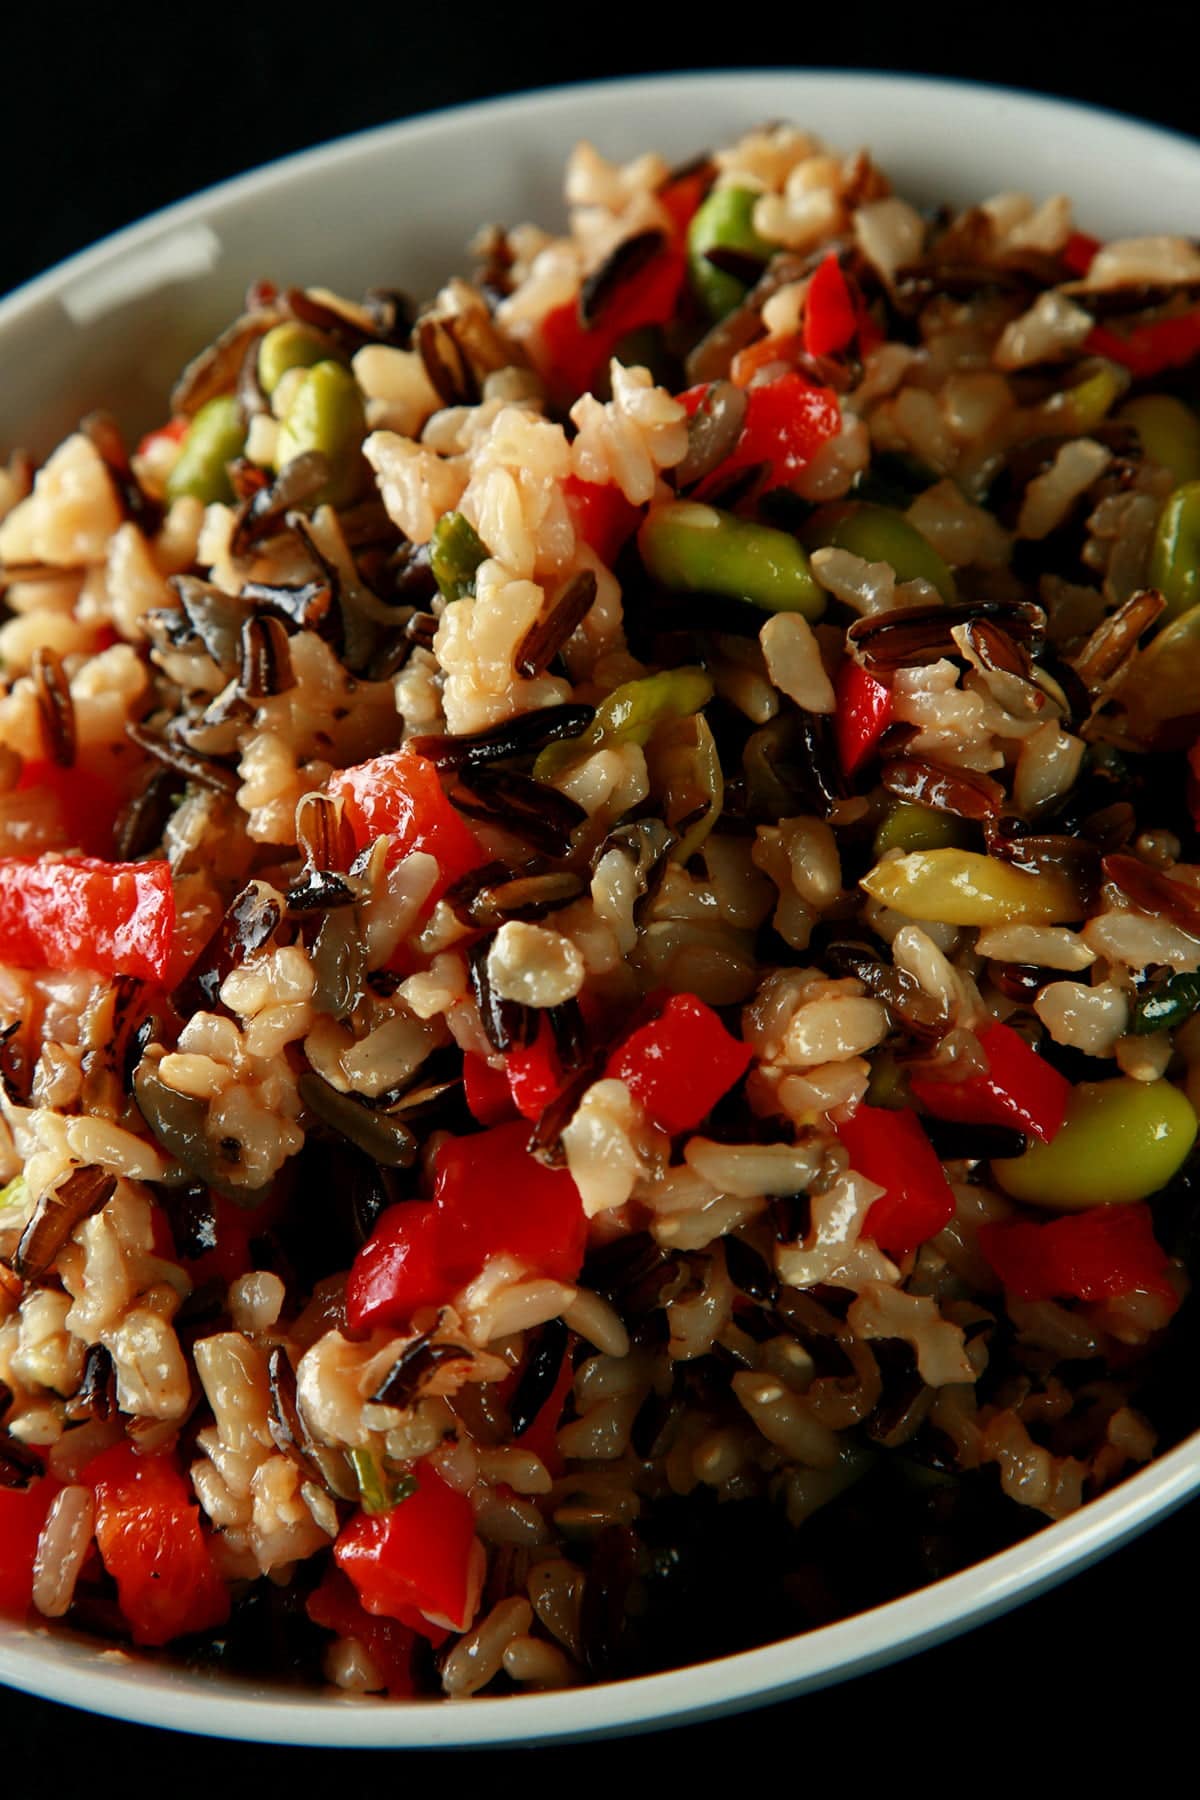 A bowl of edamame wild rice salad.  Wild rice, edamame, and red peppers are all visible.